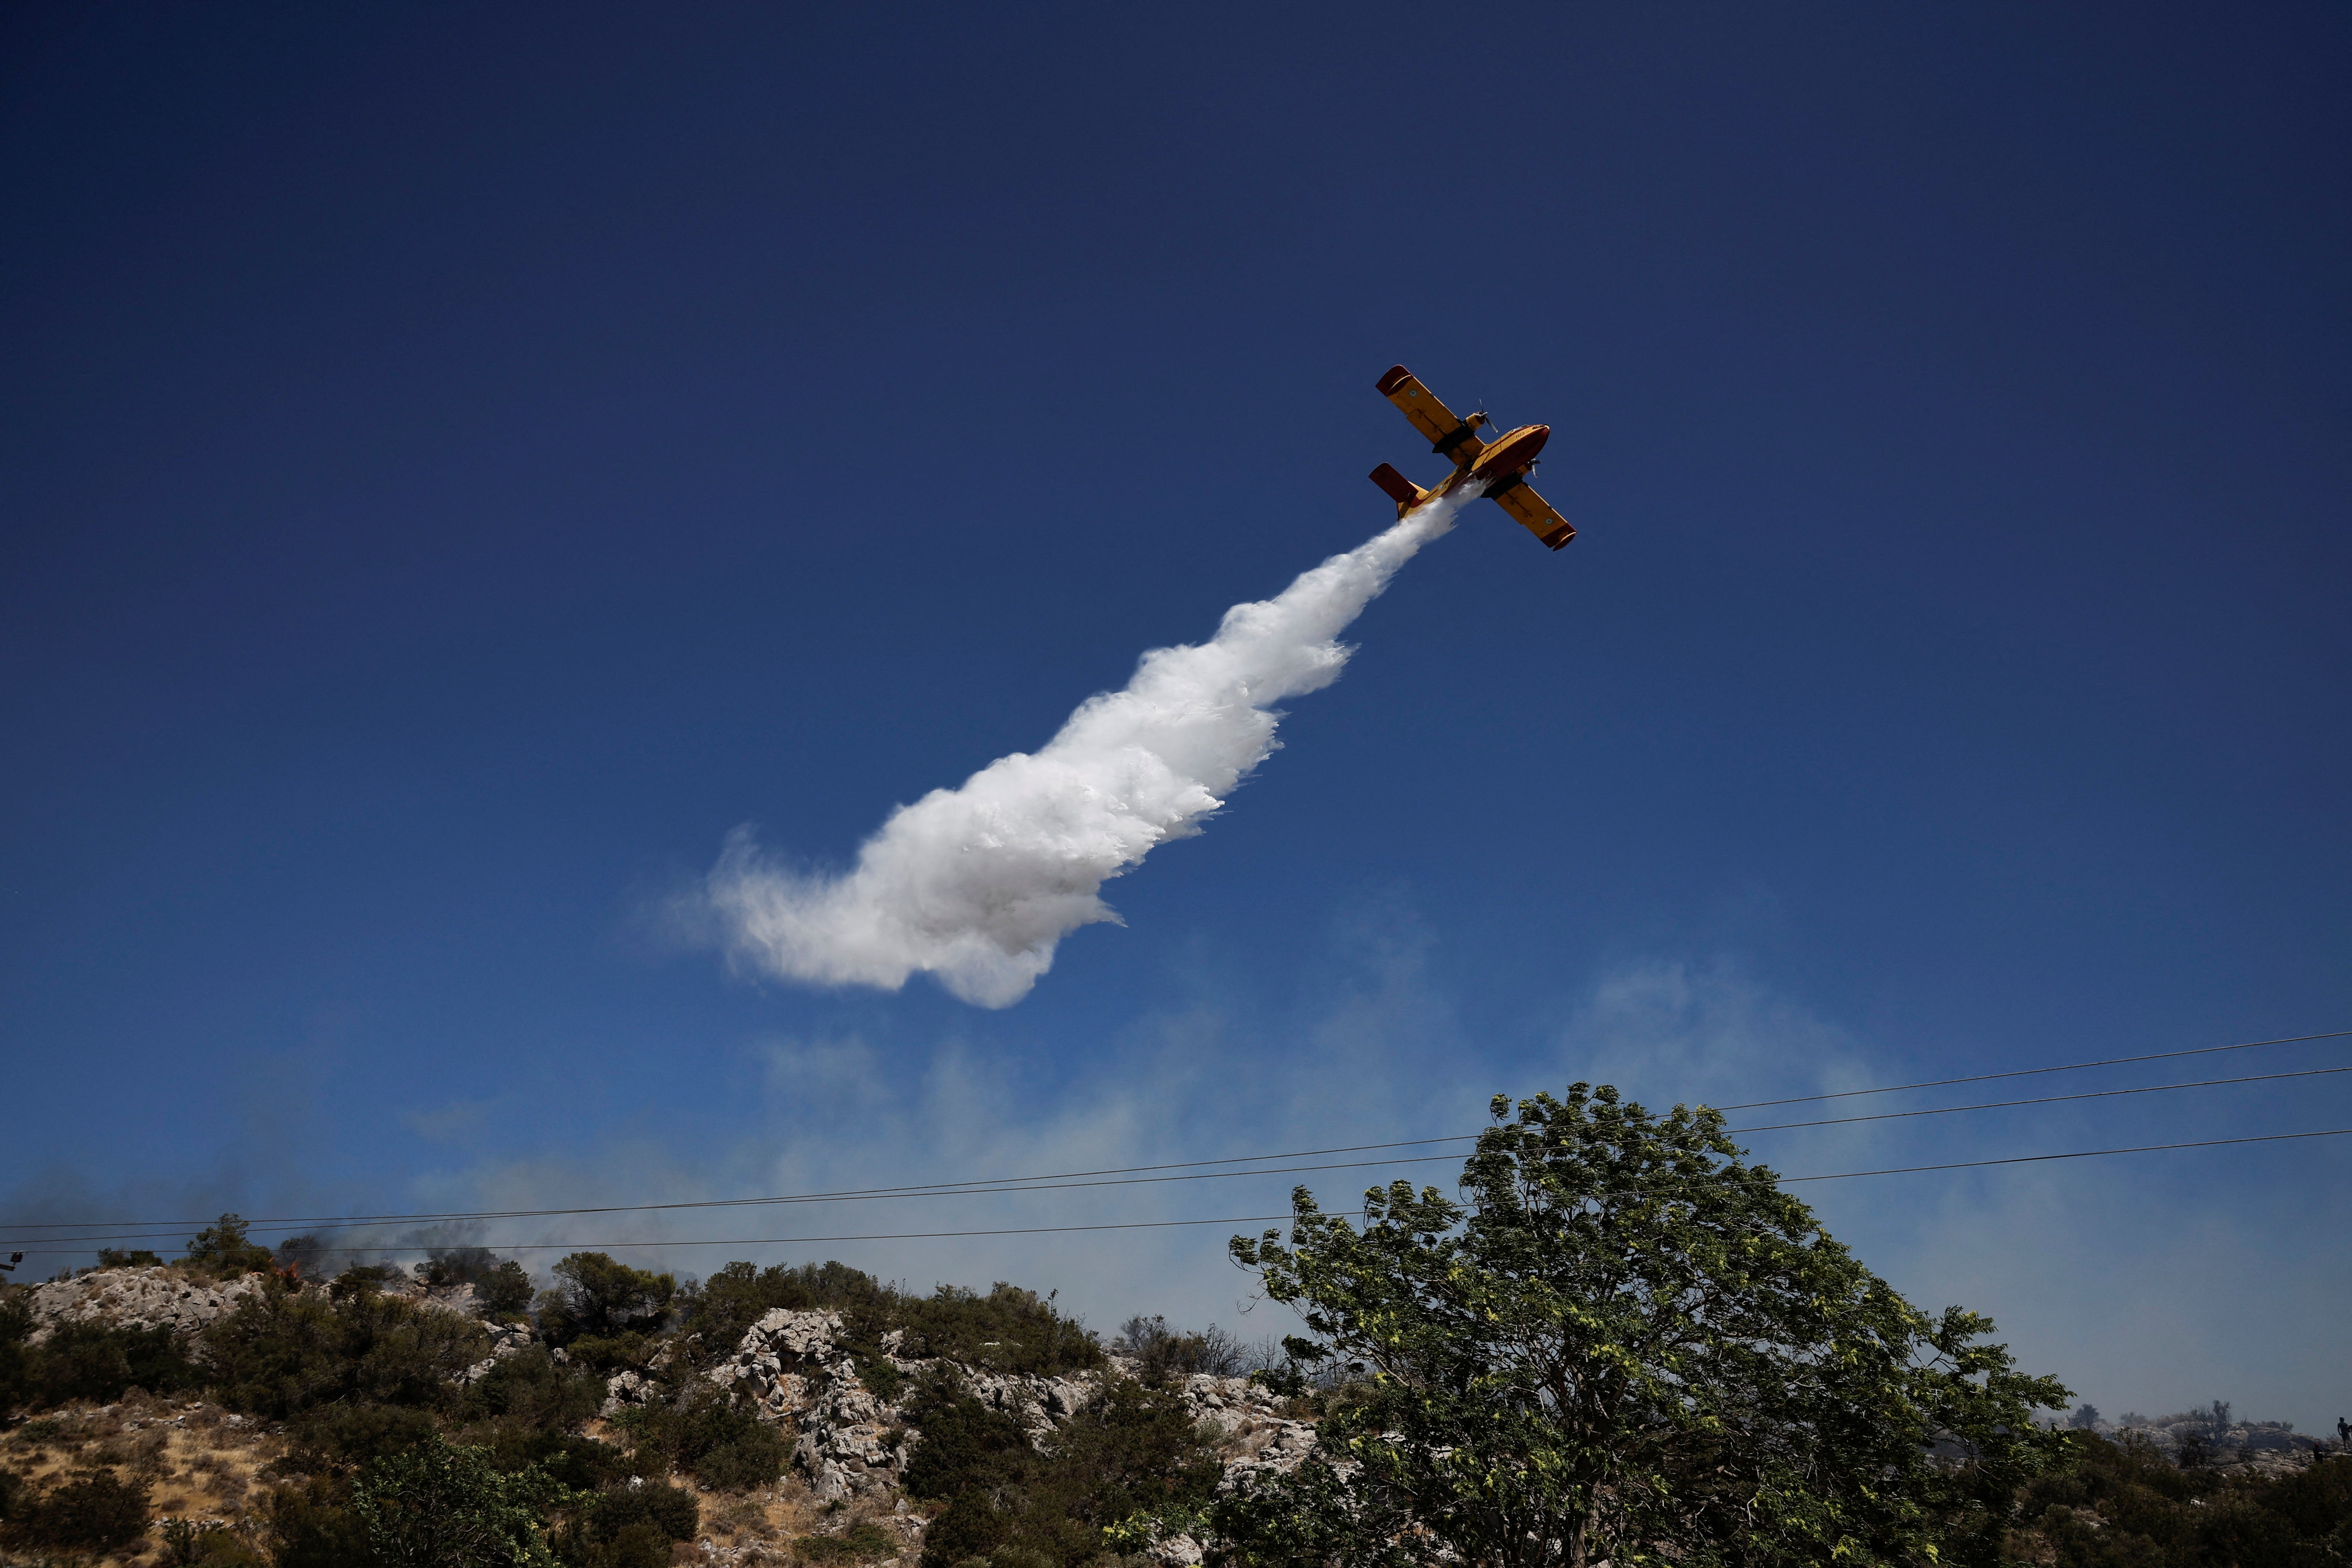 A plane drops water as firefighters try to extinguish a wildfire near the town of Koropi, Greece